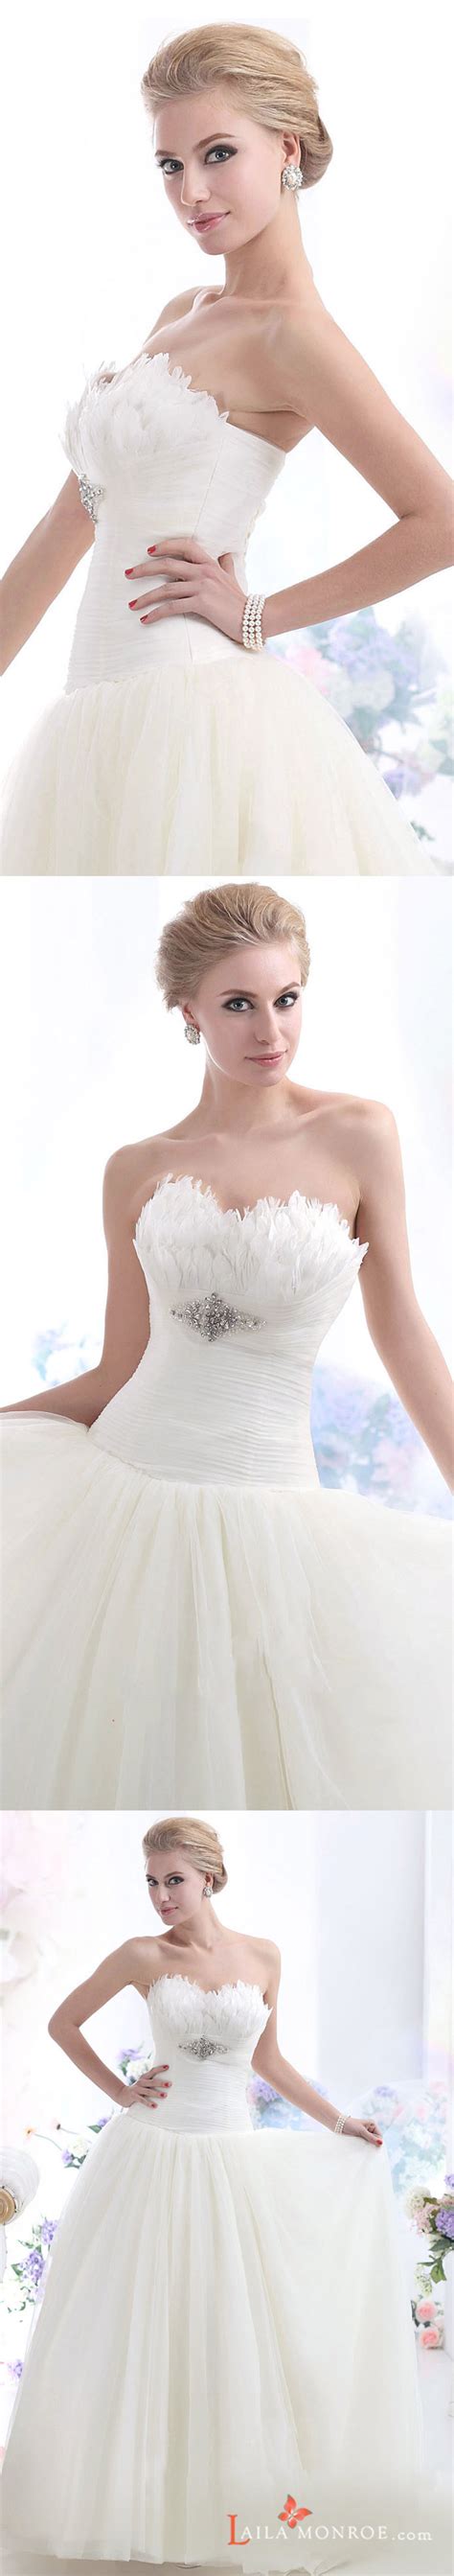 Now Available Alina Is A Stunning Tulle Wedding Dress With Feathers